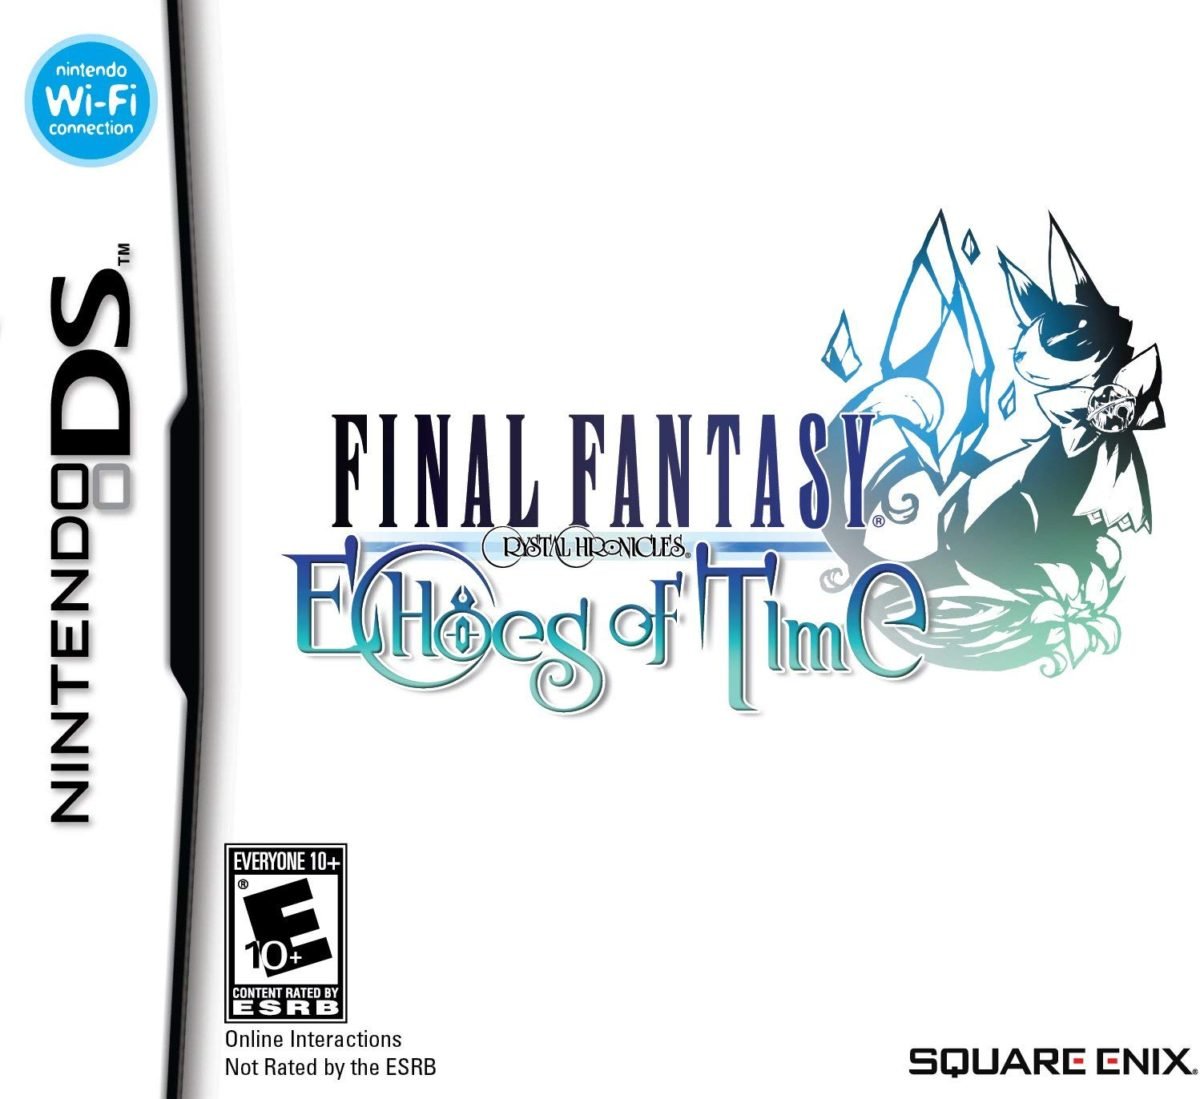 Final Fantasy Crystal Chronicles: Echoes of Time player count stats